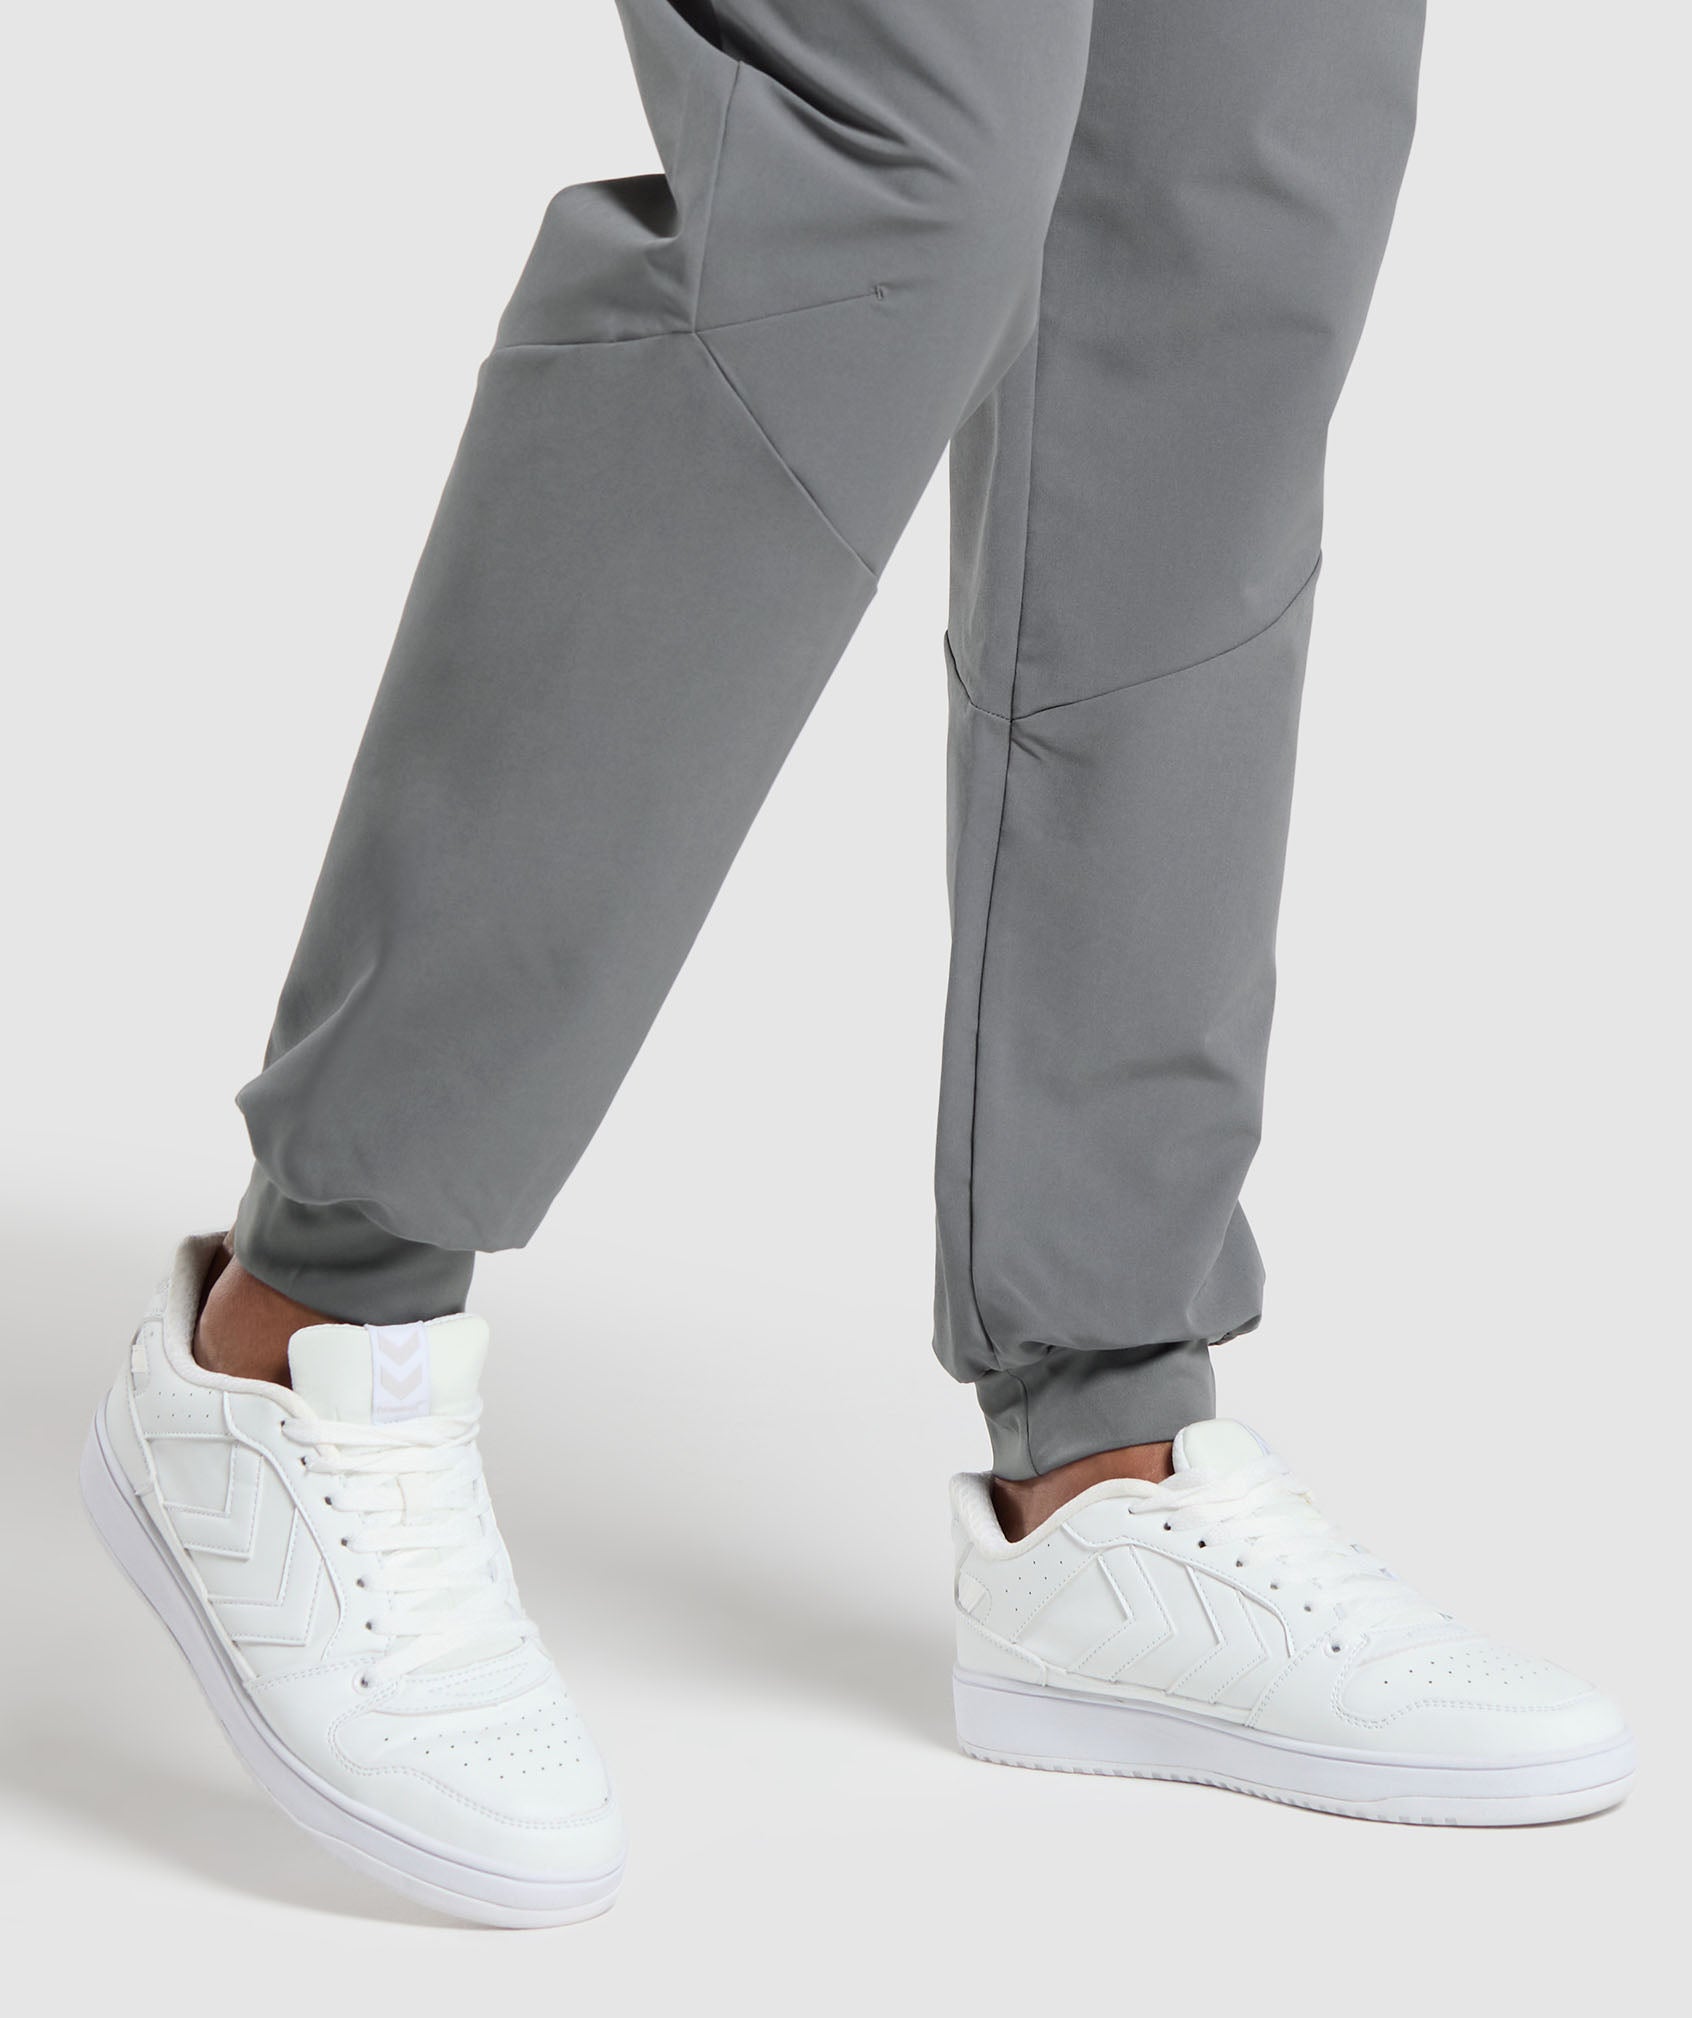 Ease Woven Joggers in Pitch Grey - view 5